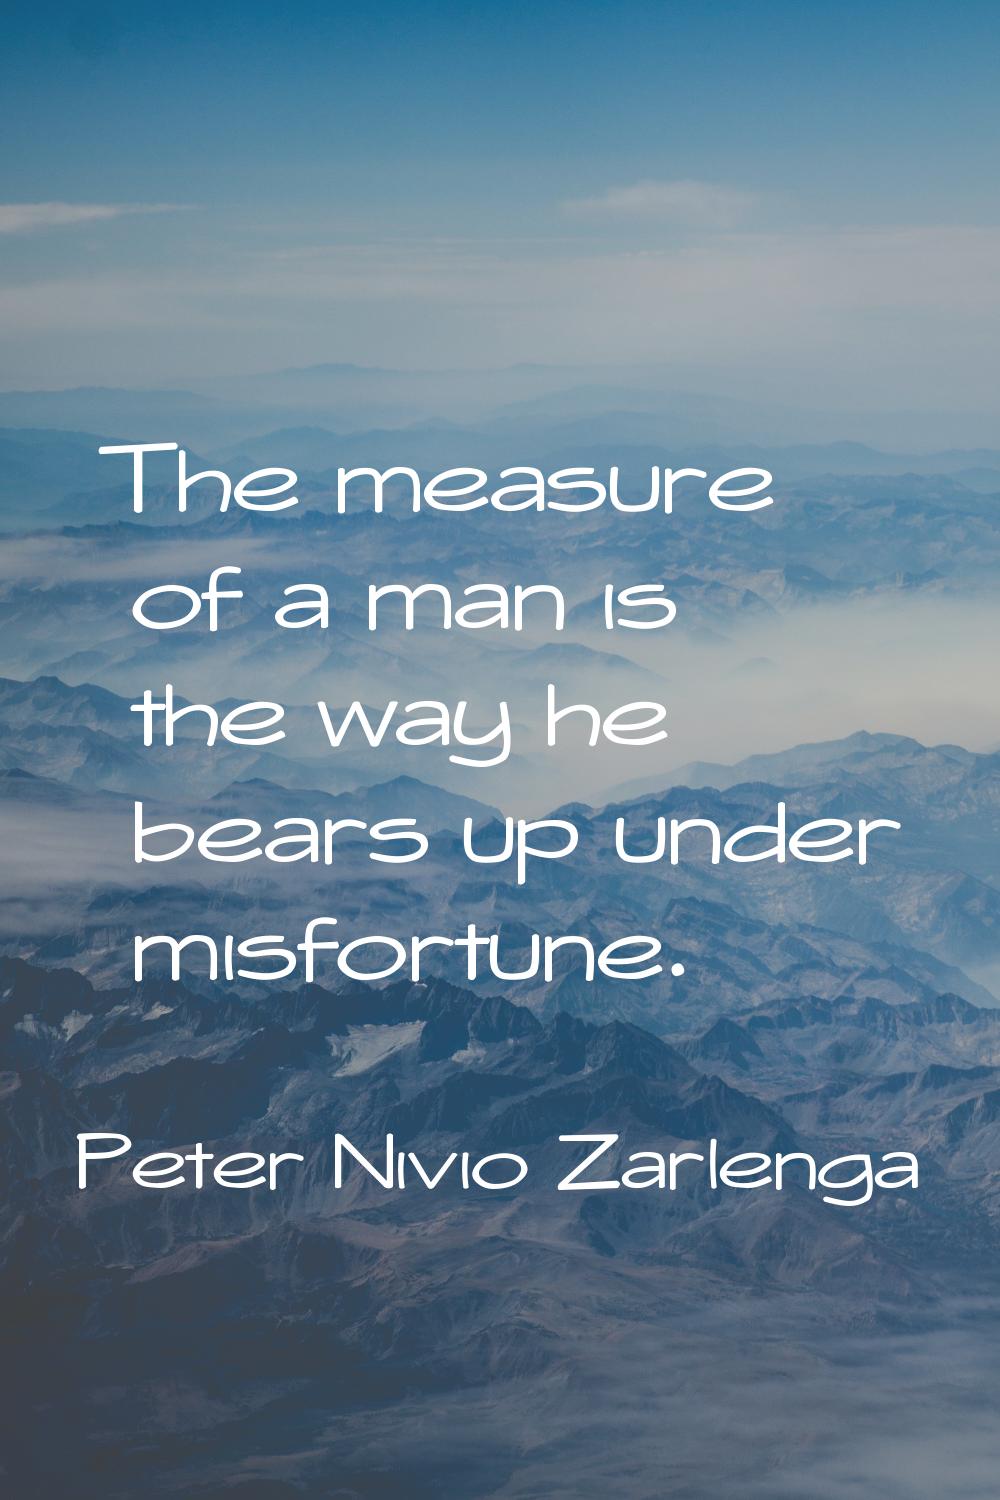 The measure of a man is the way he bears up under misfortune.